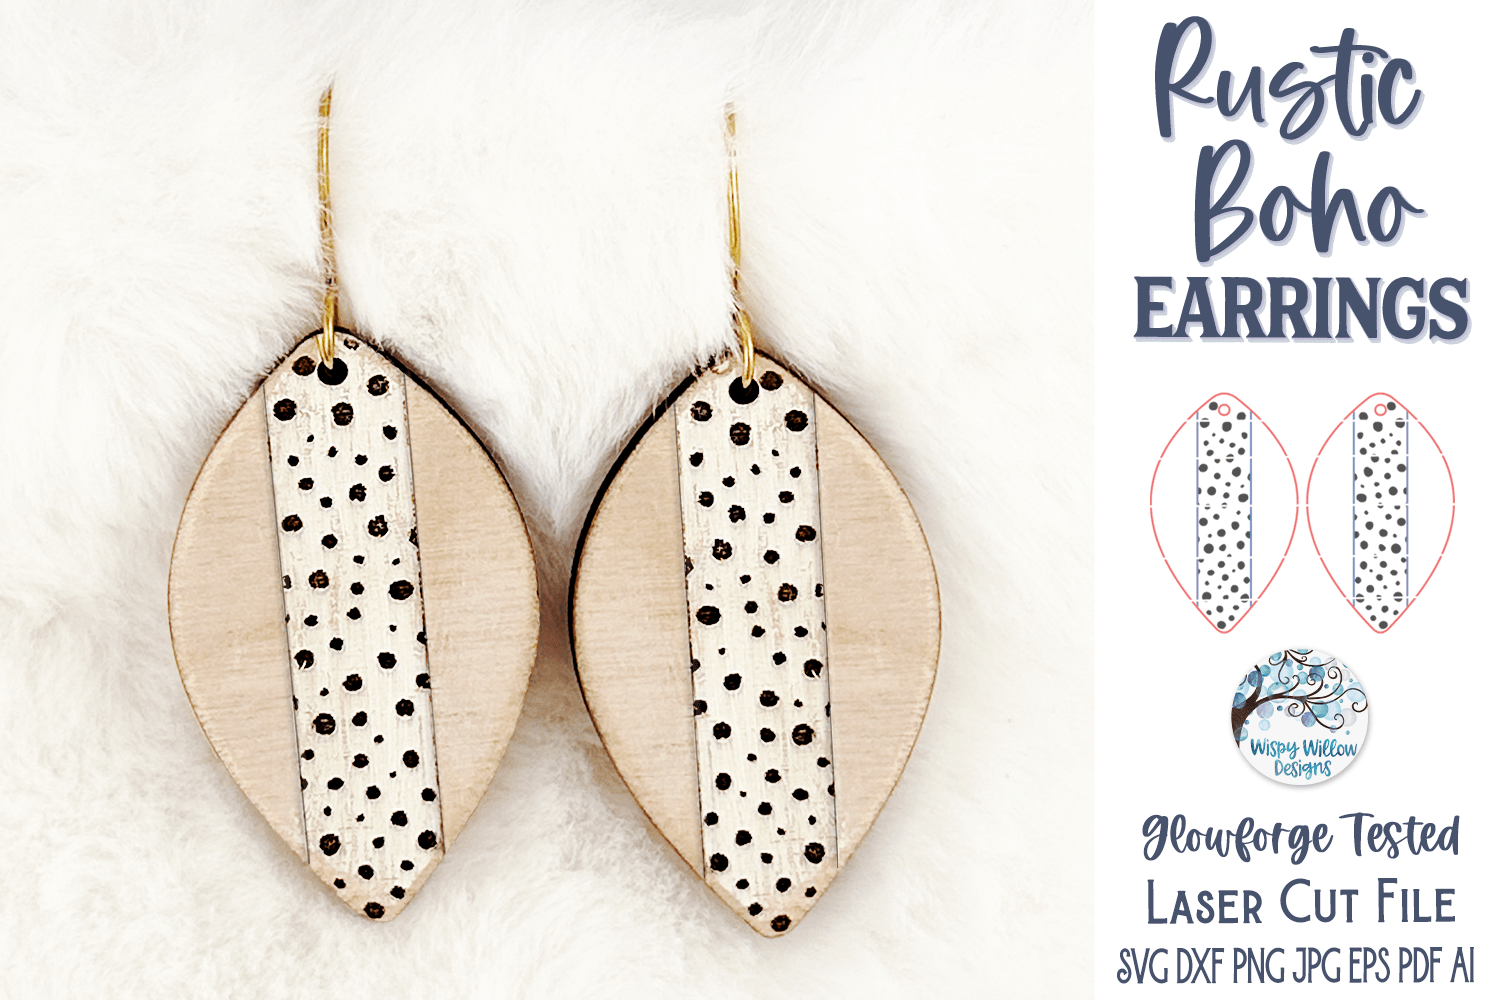 Rustic Boho Earring File for Glowforge or Laser Wispy Willow Designs Company